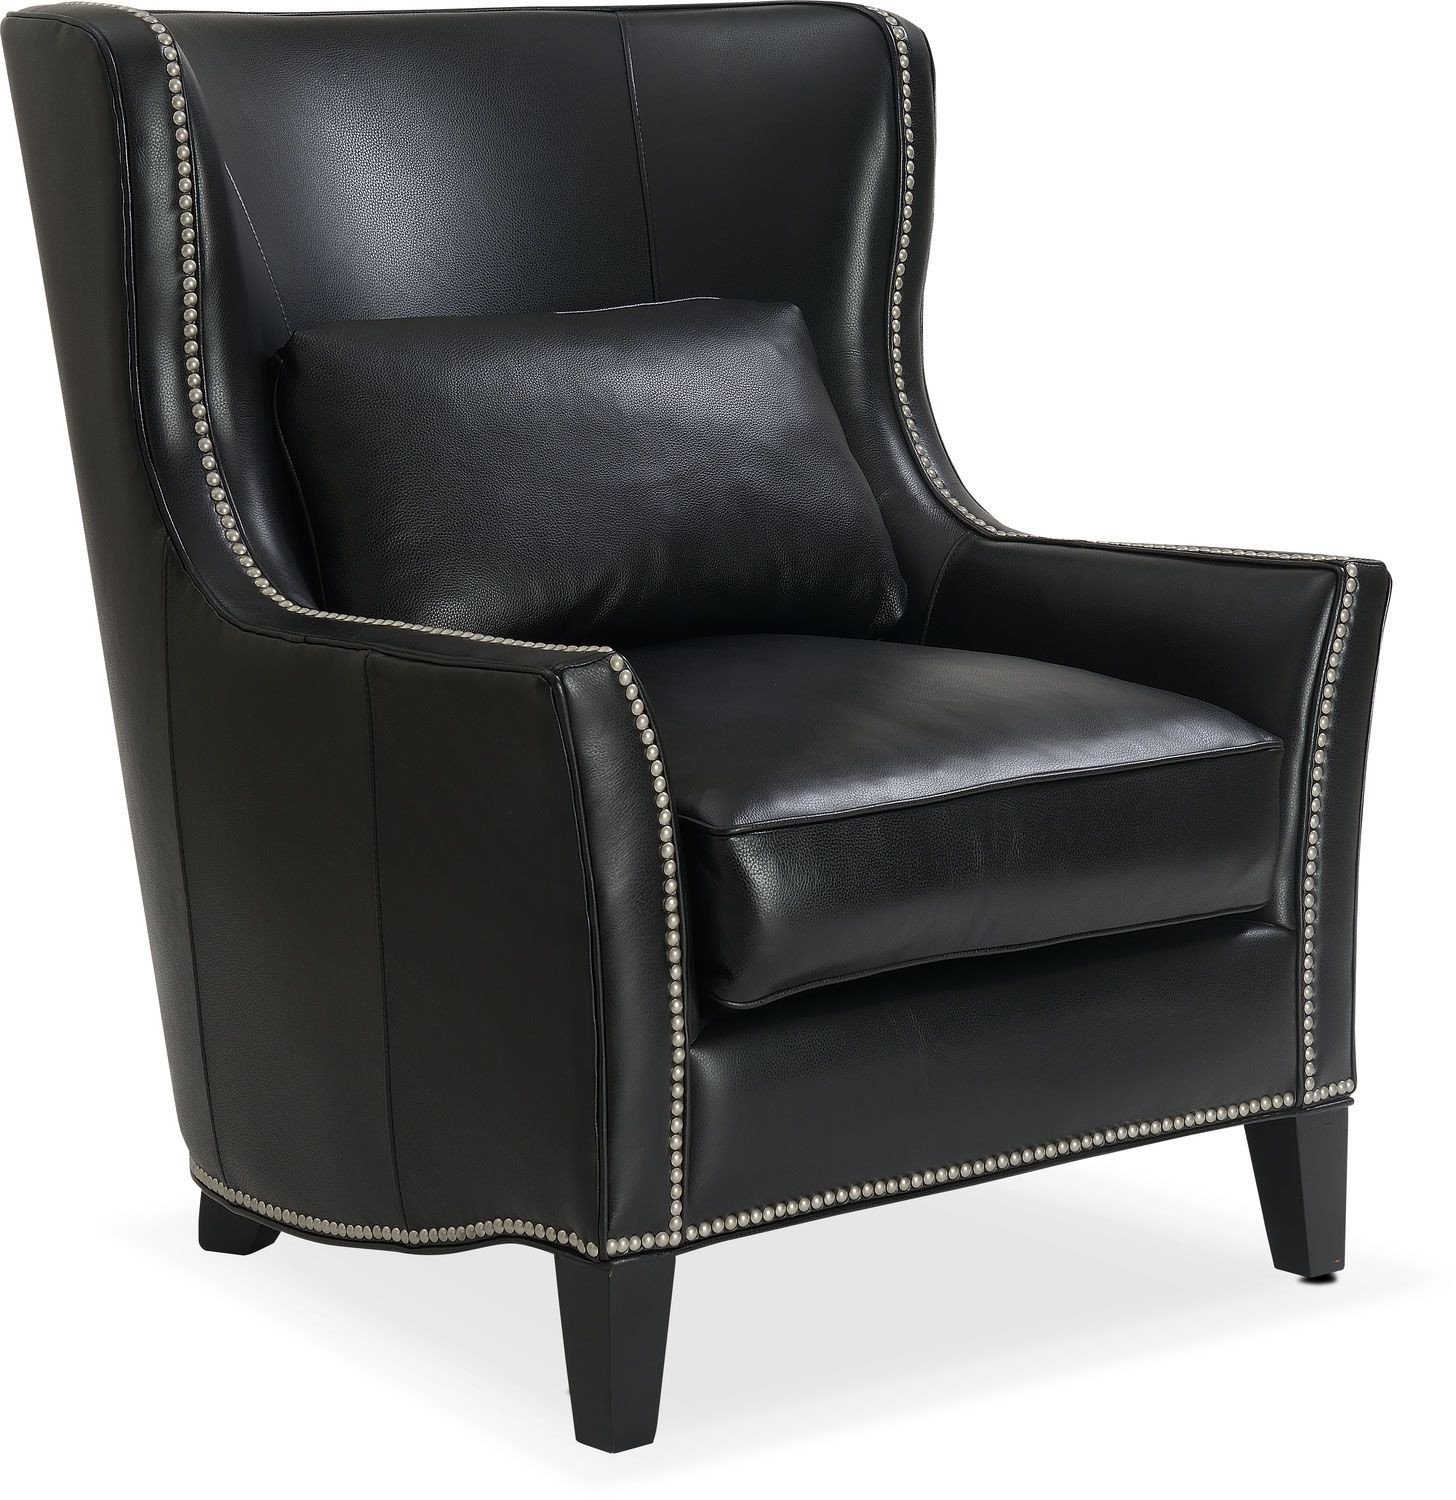 Gothic Bedroom Furniture for Sale Inspirational Living Room Furniture Fenwick Accent Chair Black